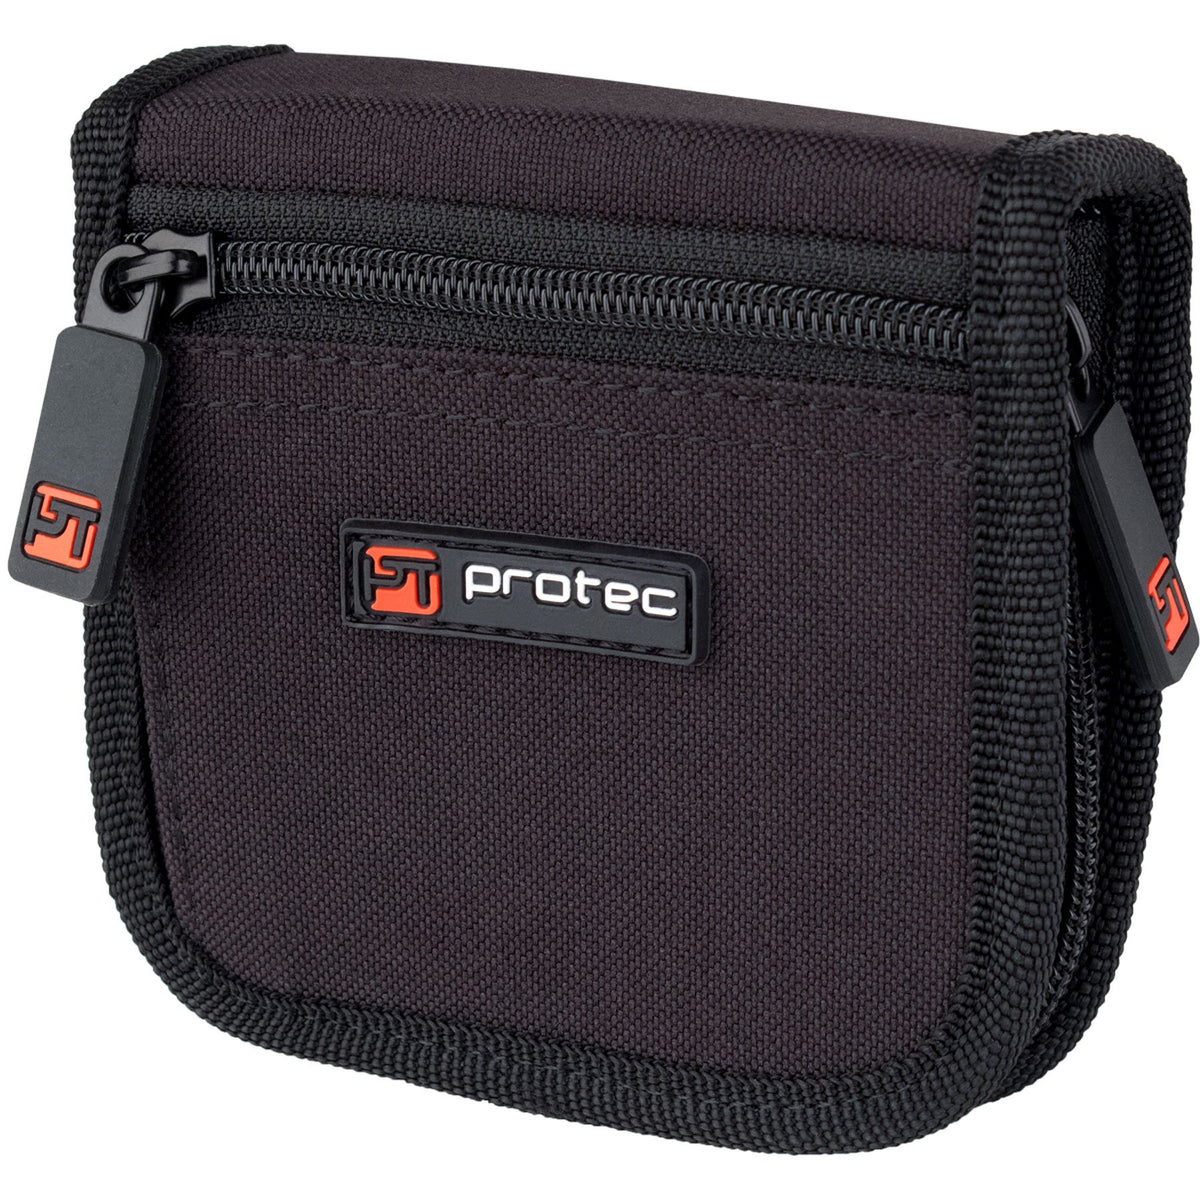 Protec - Small Brass (Trumpet) 3-Piece Nylon Mouthpiece Pouch with Zipper Closure-Accessories-Protec-Music Elements